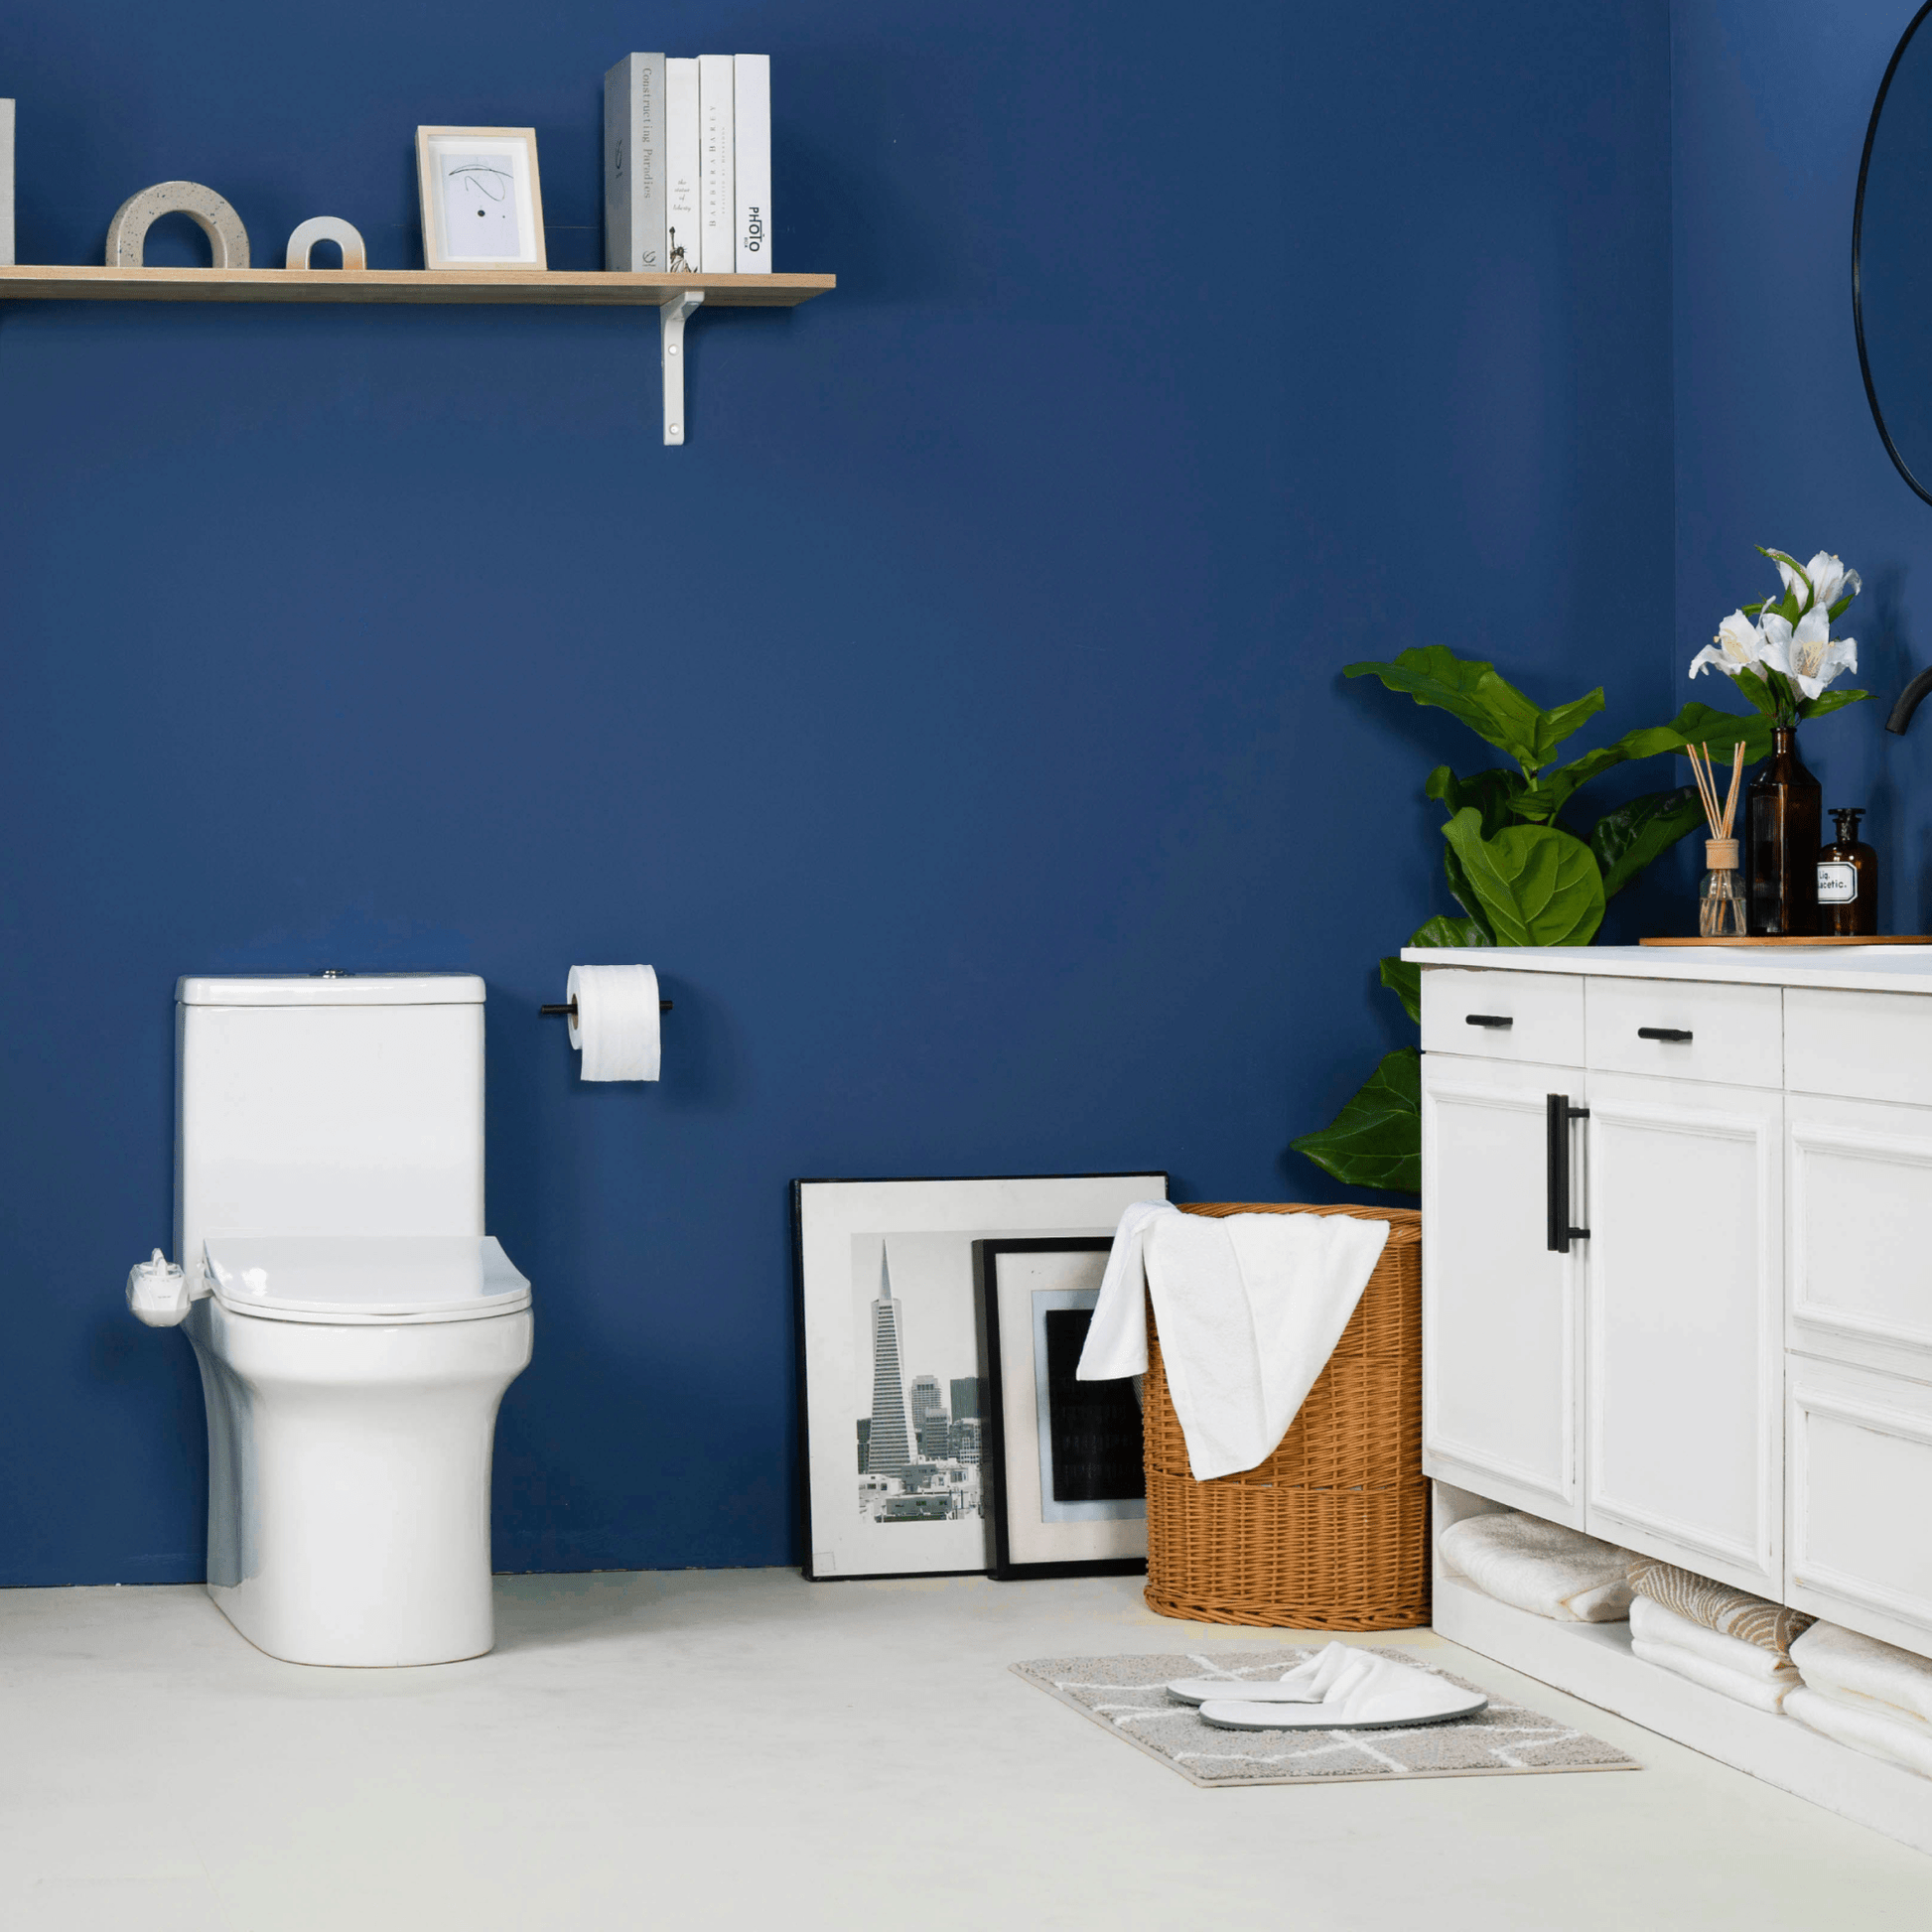 NEO 120 Plus White installed on a toilet, in a modern blue bathroom with a cabinet, paintings, and basket of towels